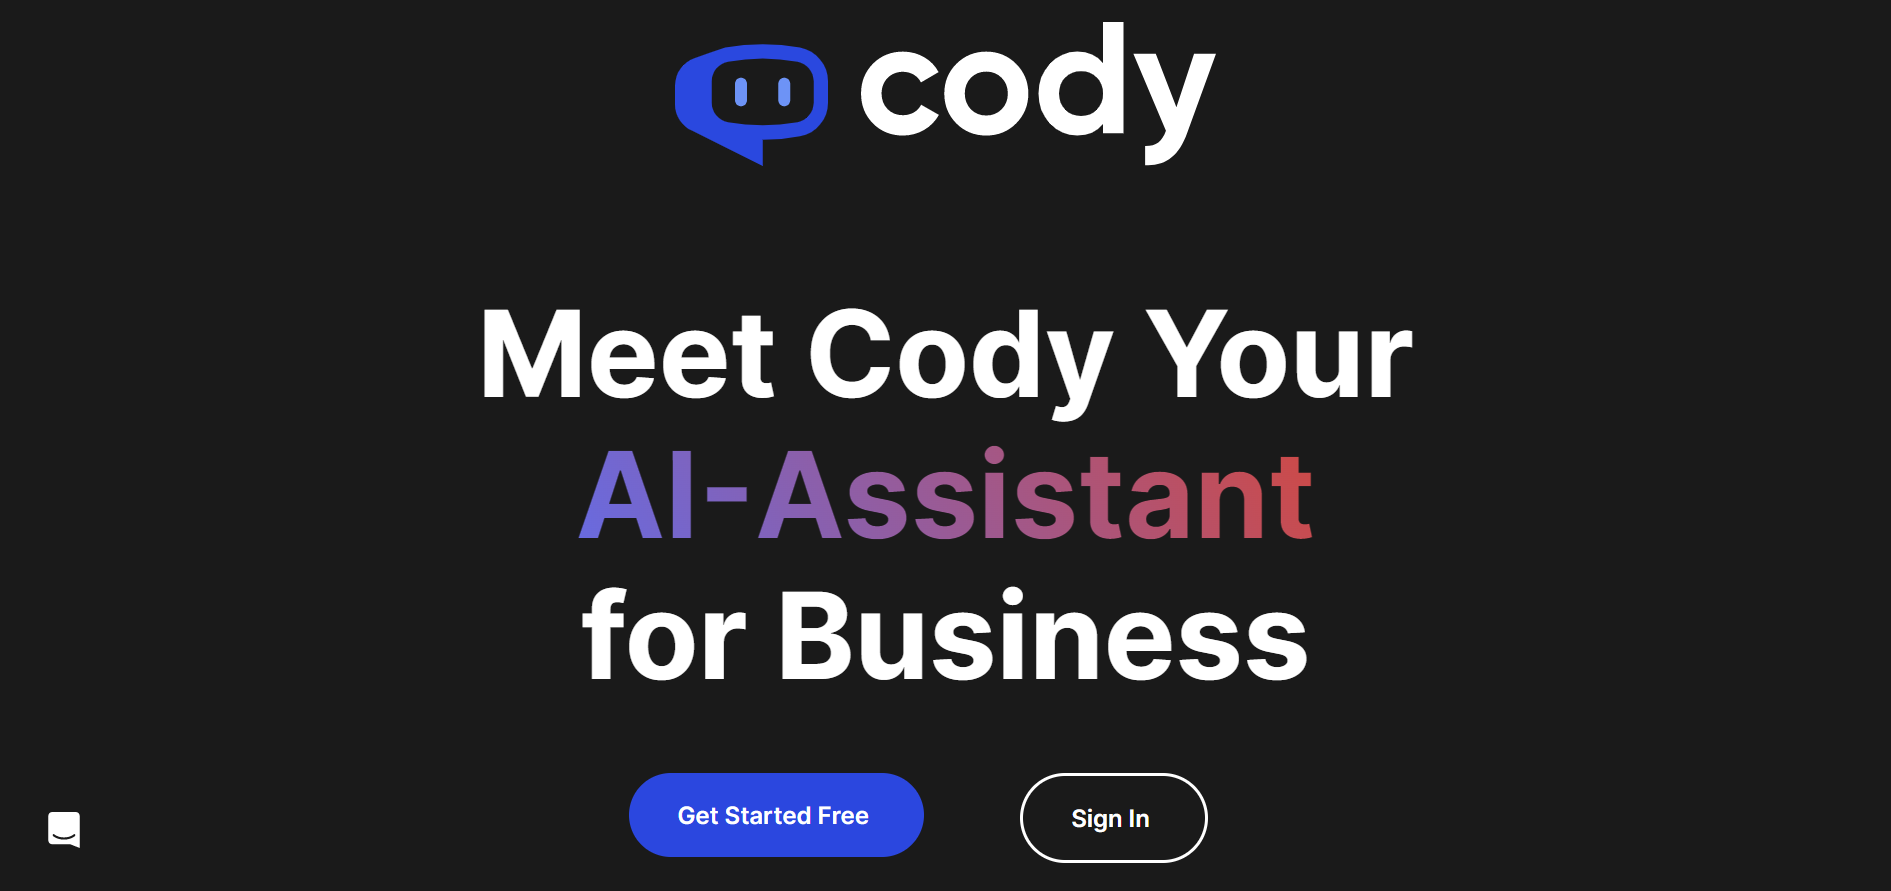 MeetCody.ai: Your Customizable AI Employee Ready to Boost Your Business